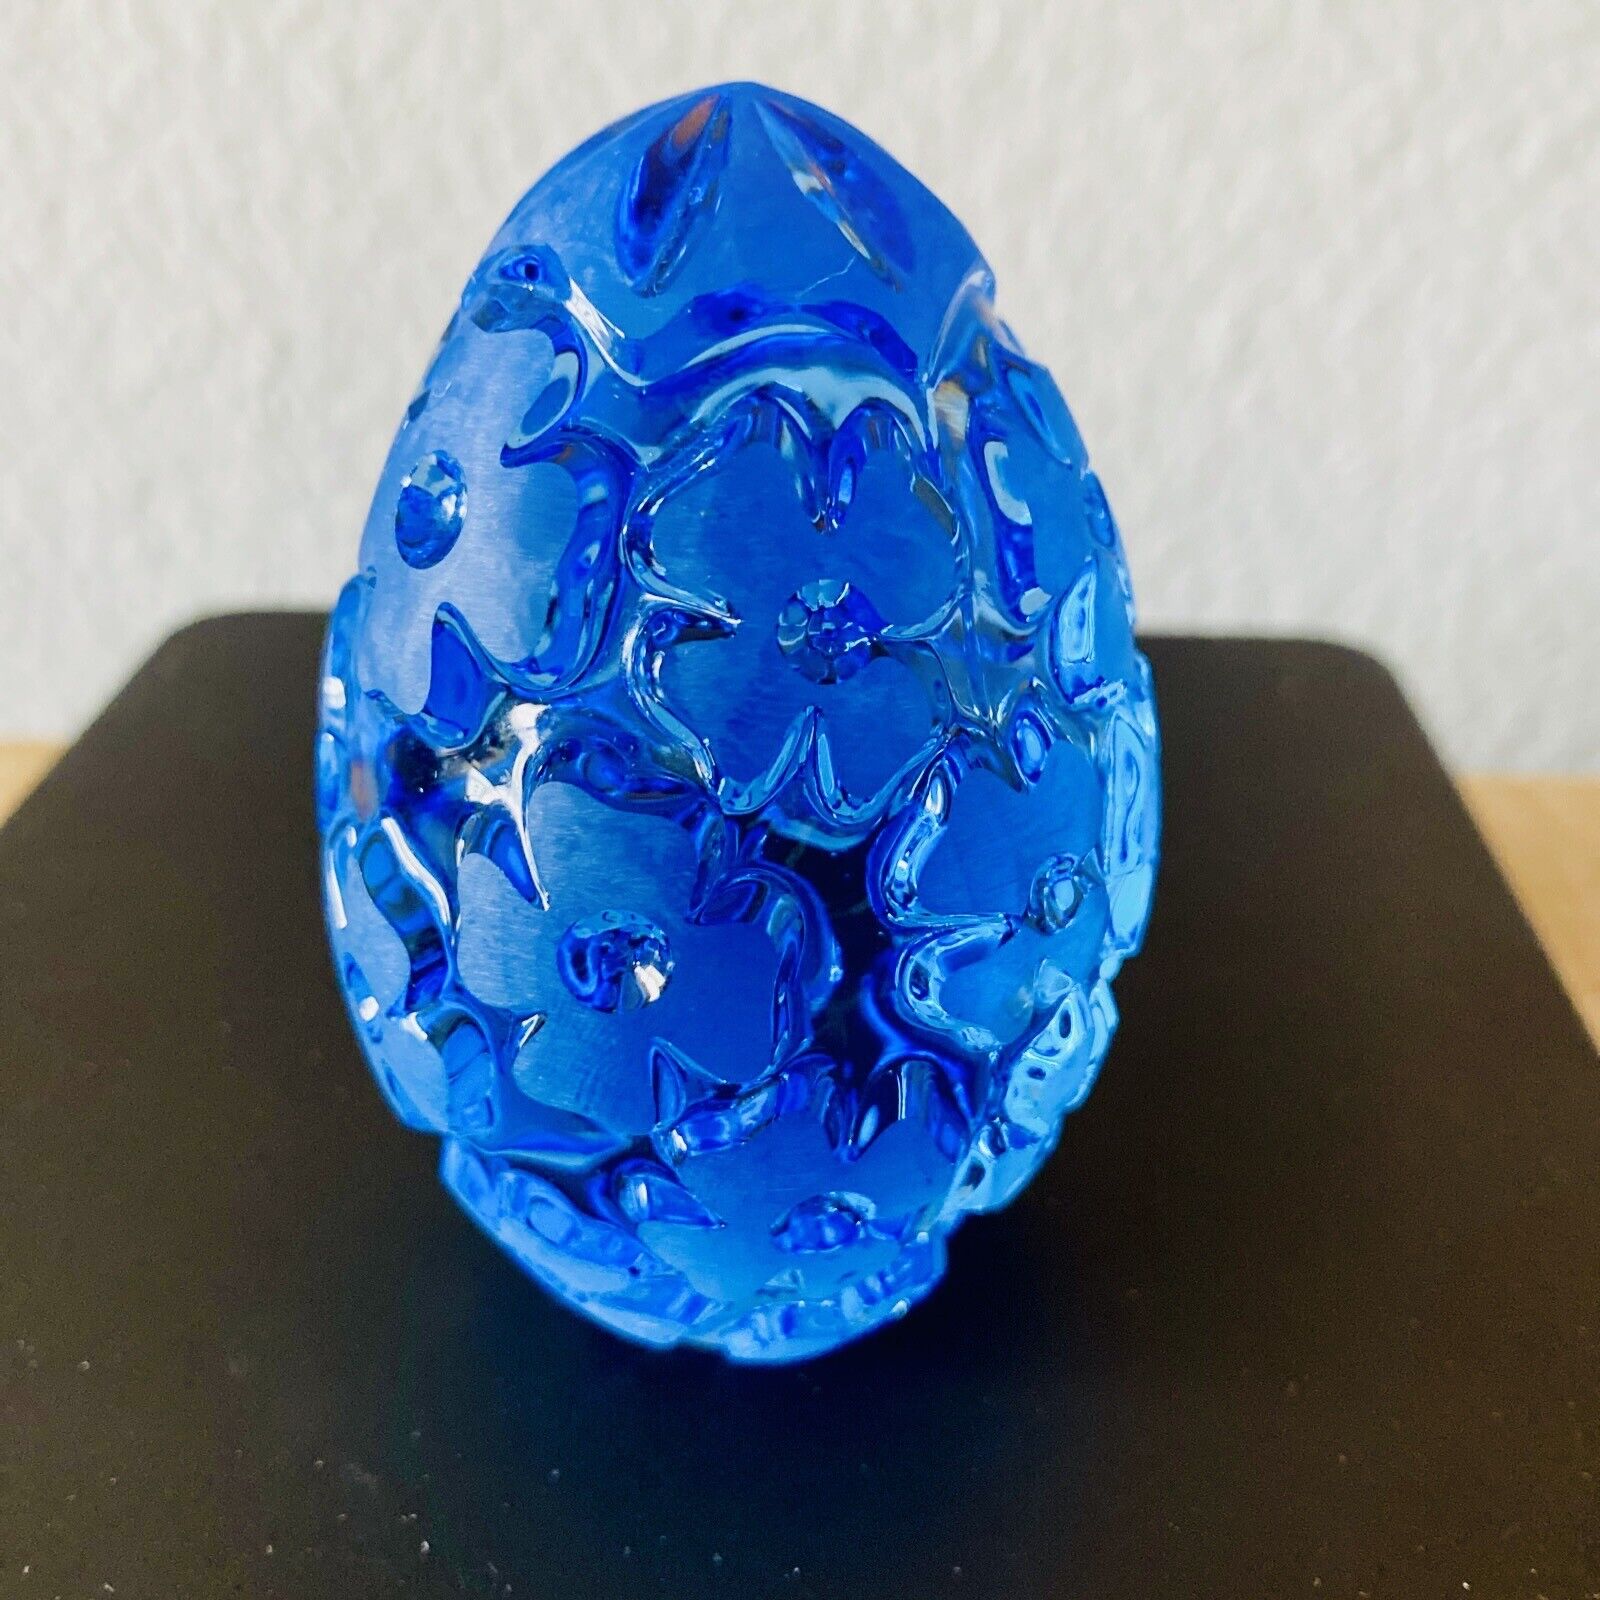 Vintage Daisy Electric Blue Egg Lead Crystal Made In Germany Paperweight Figure